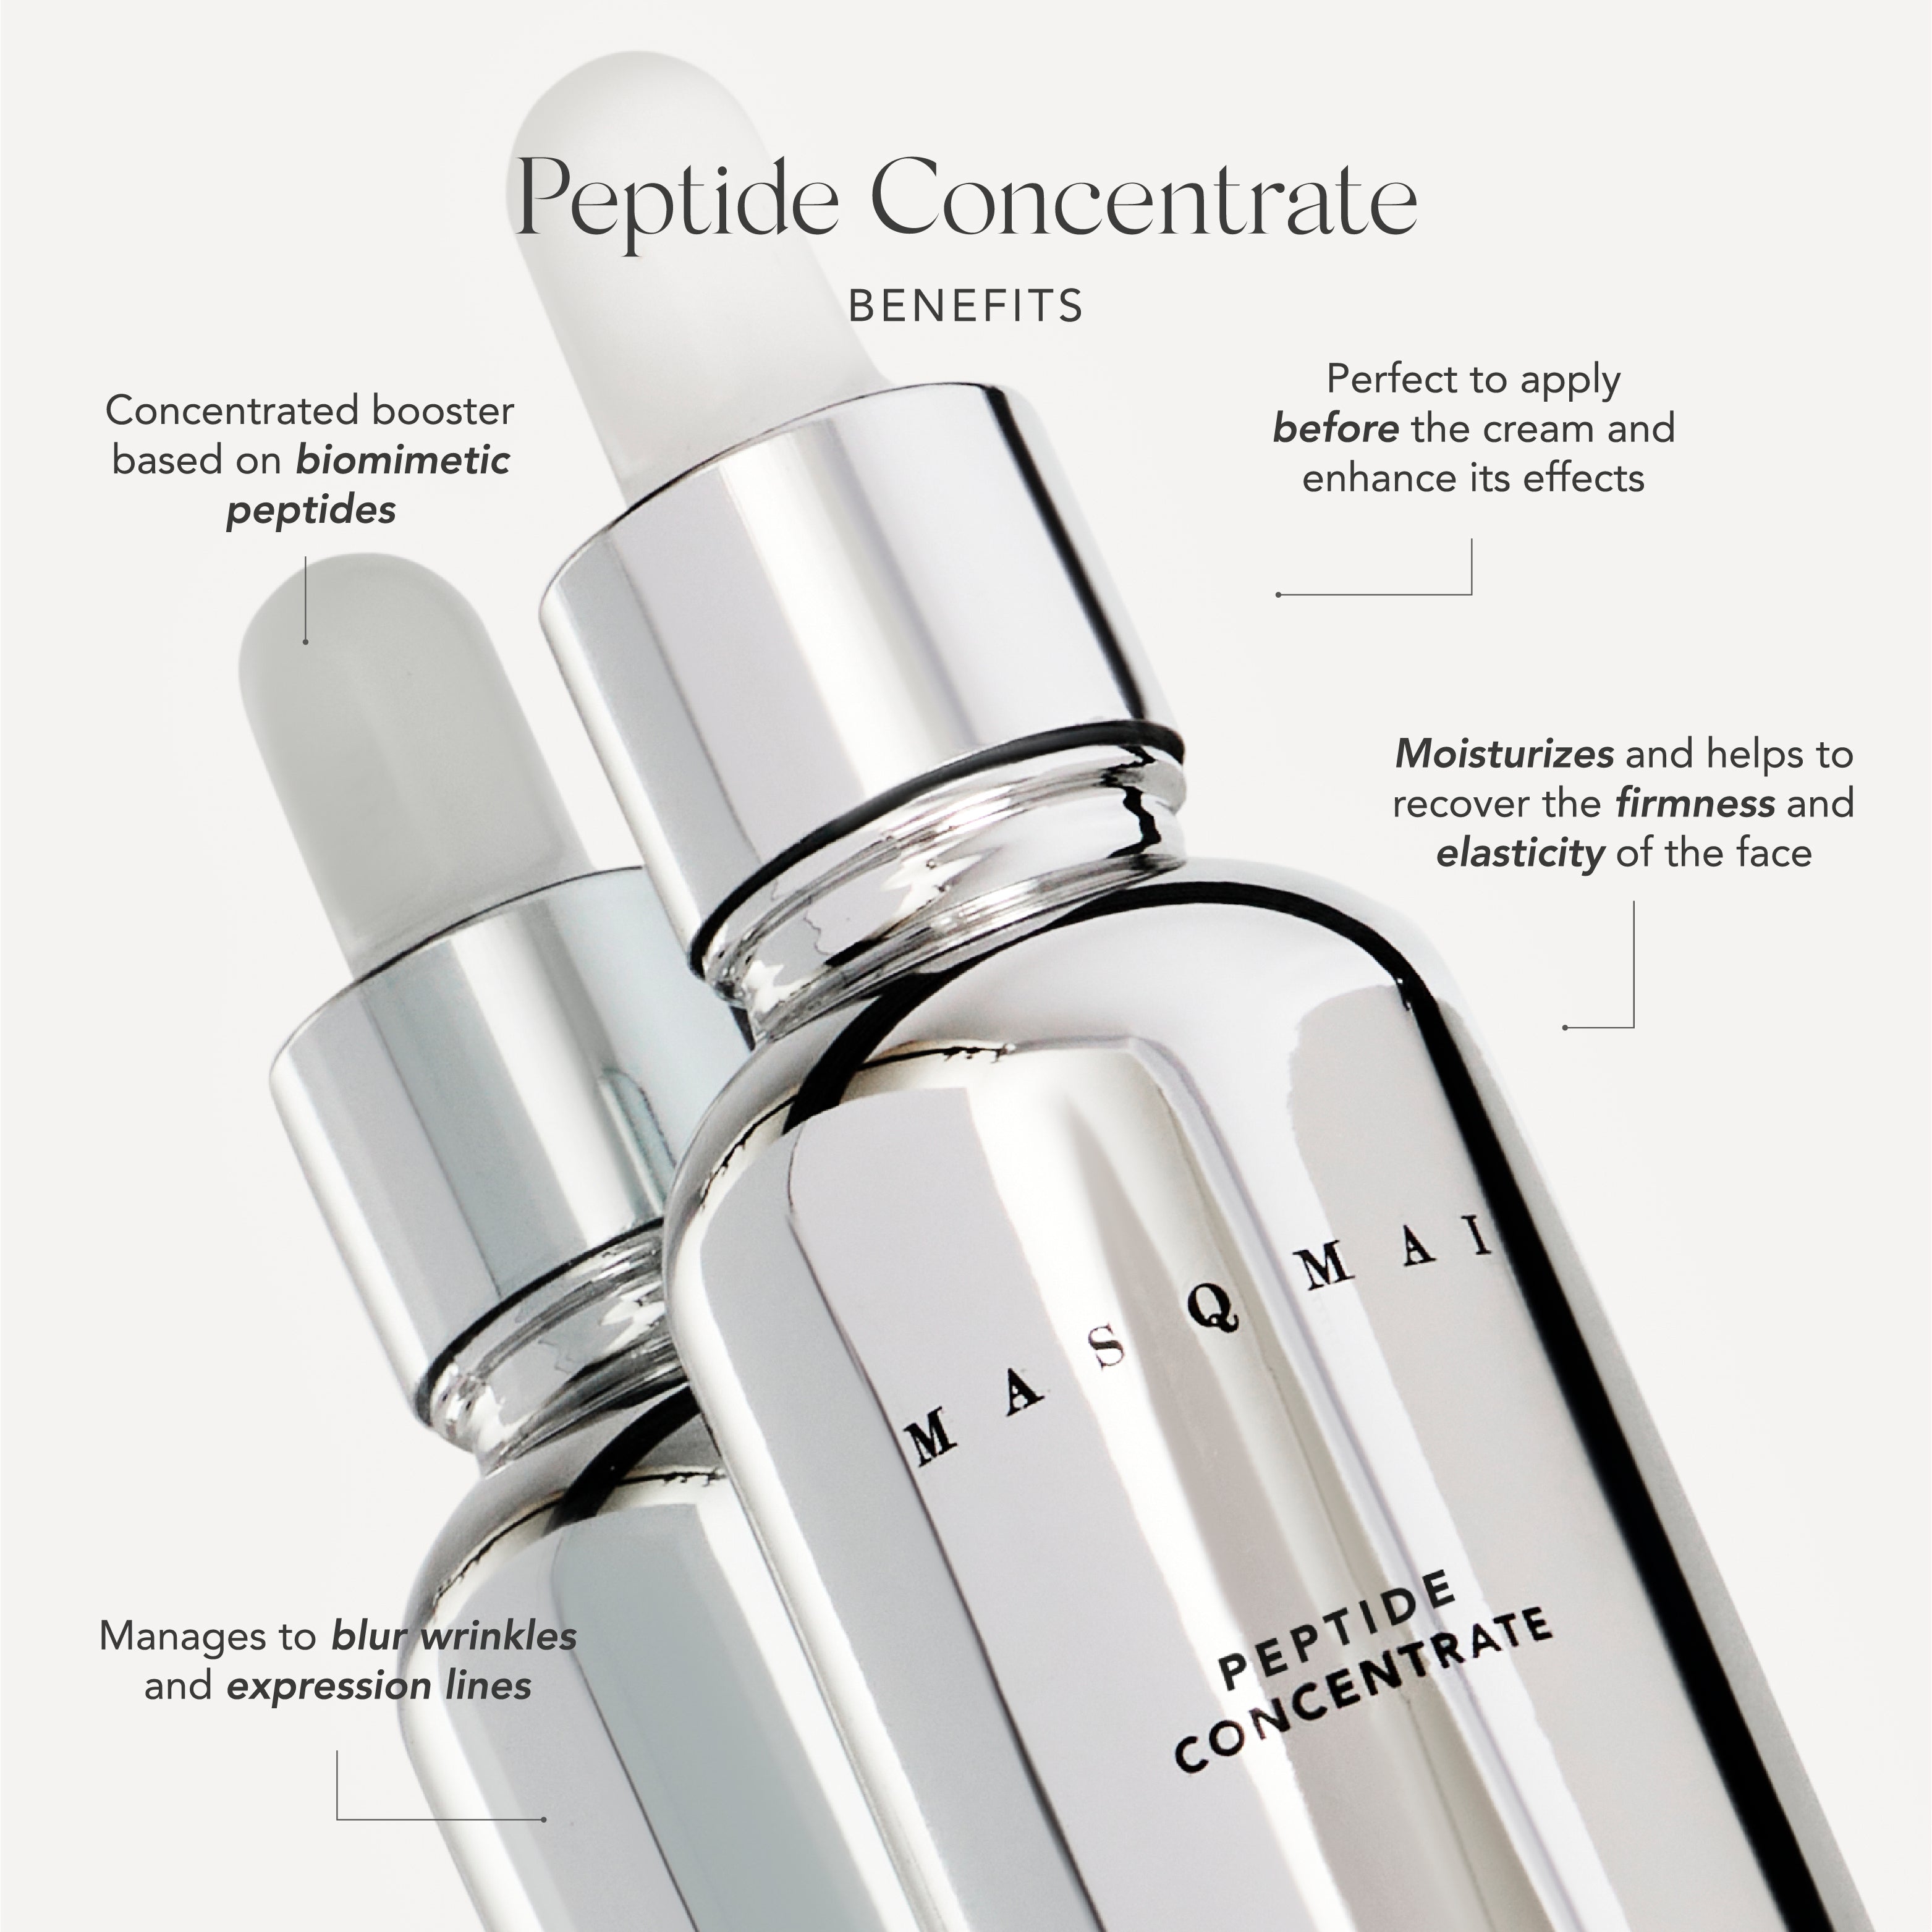 PEPTIDE CONCENTRATE